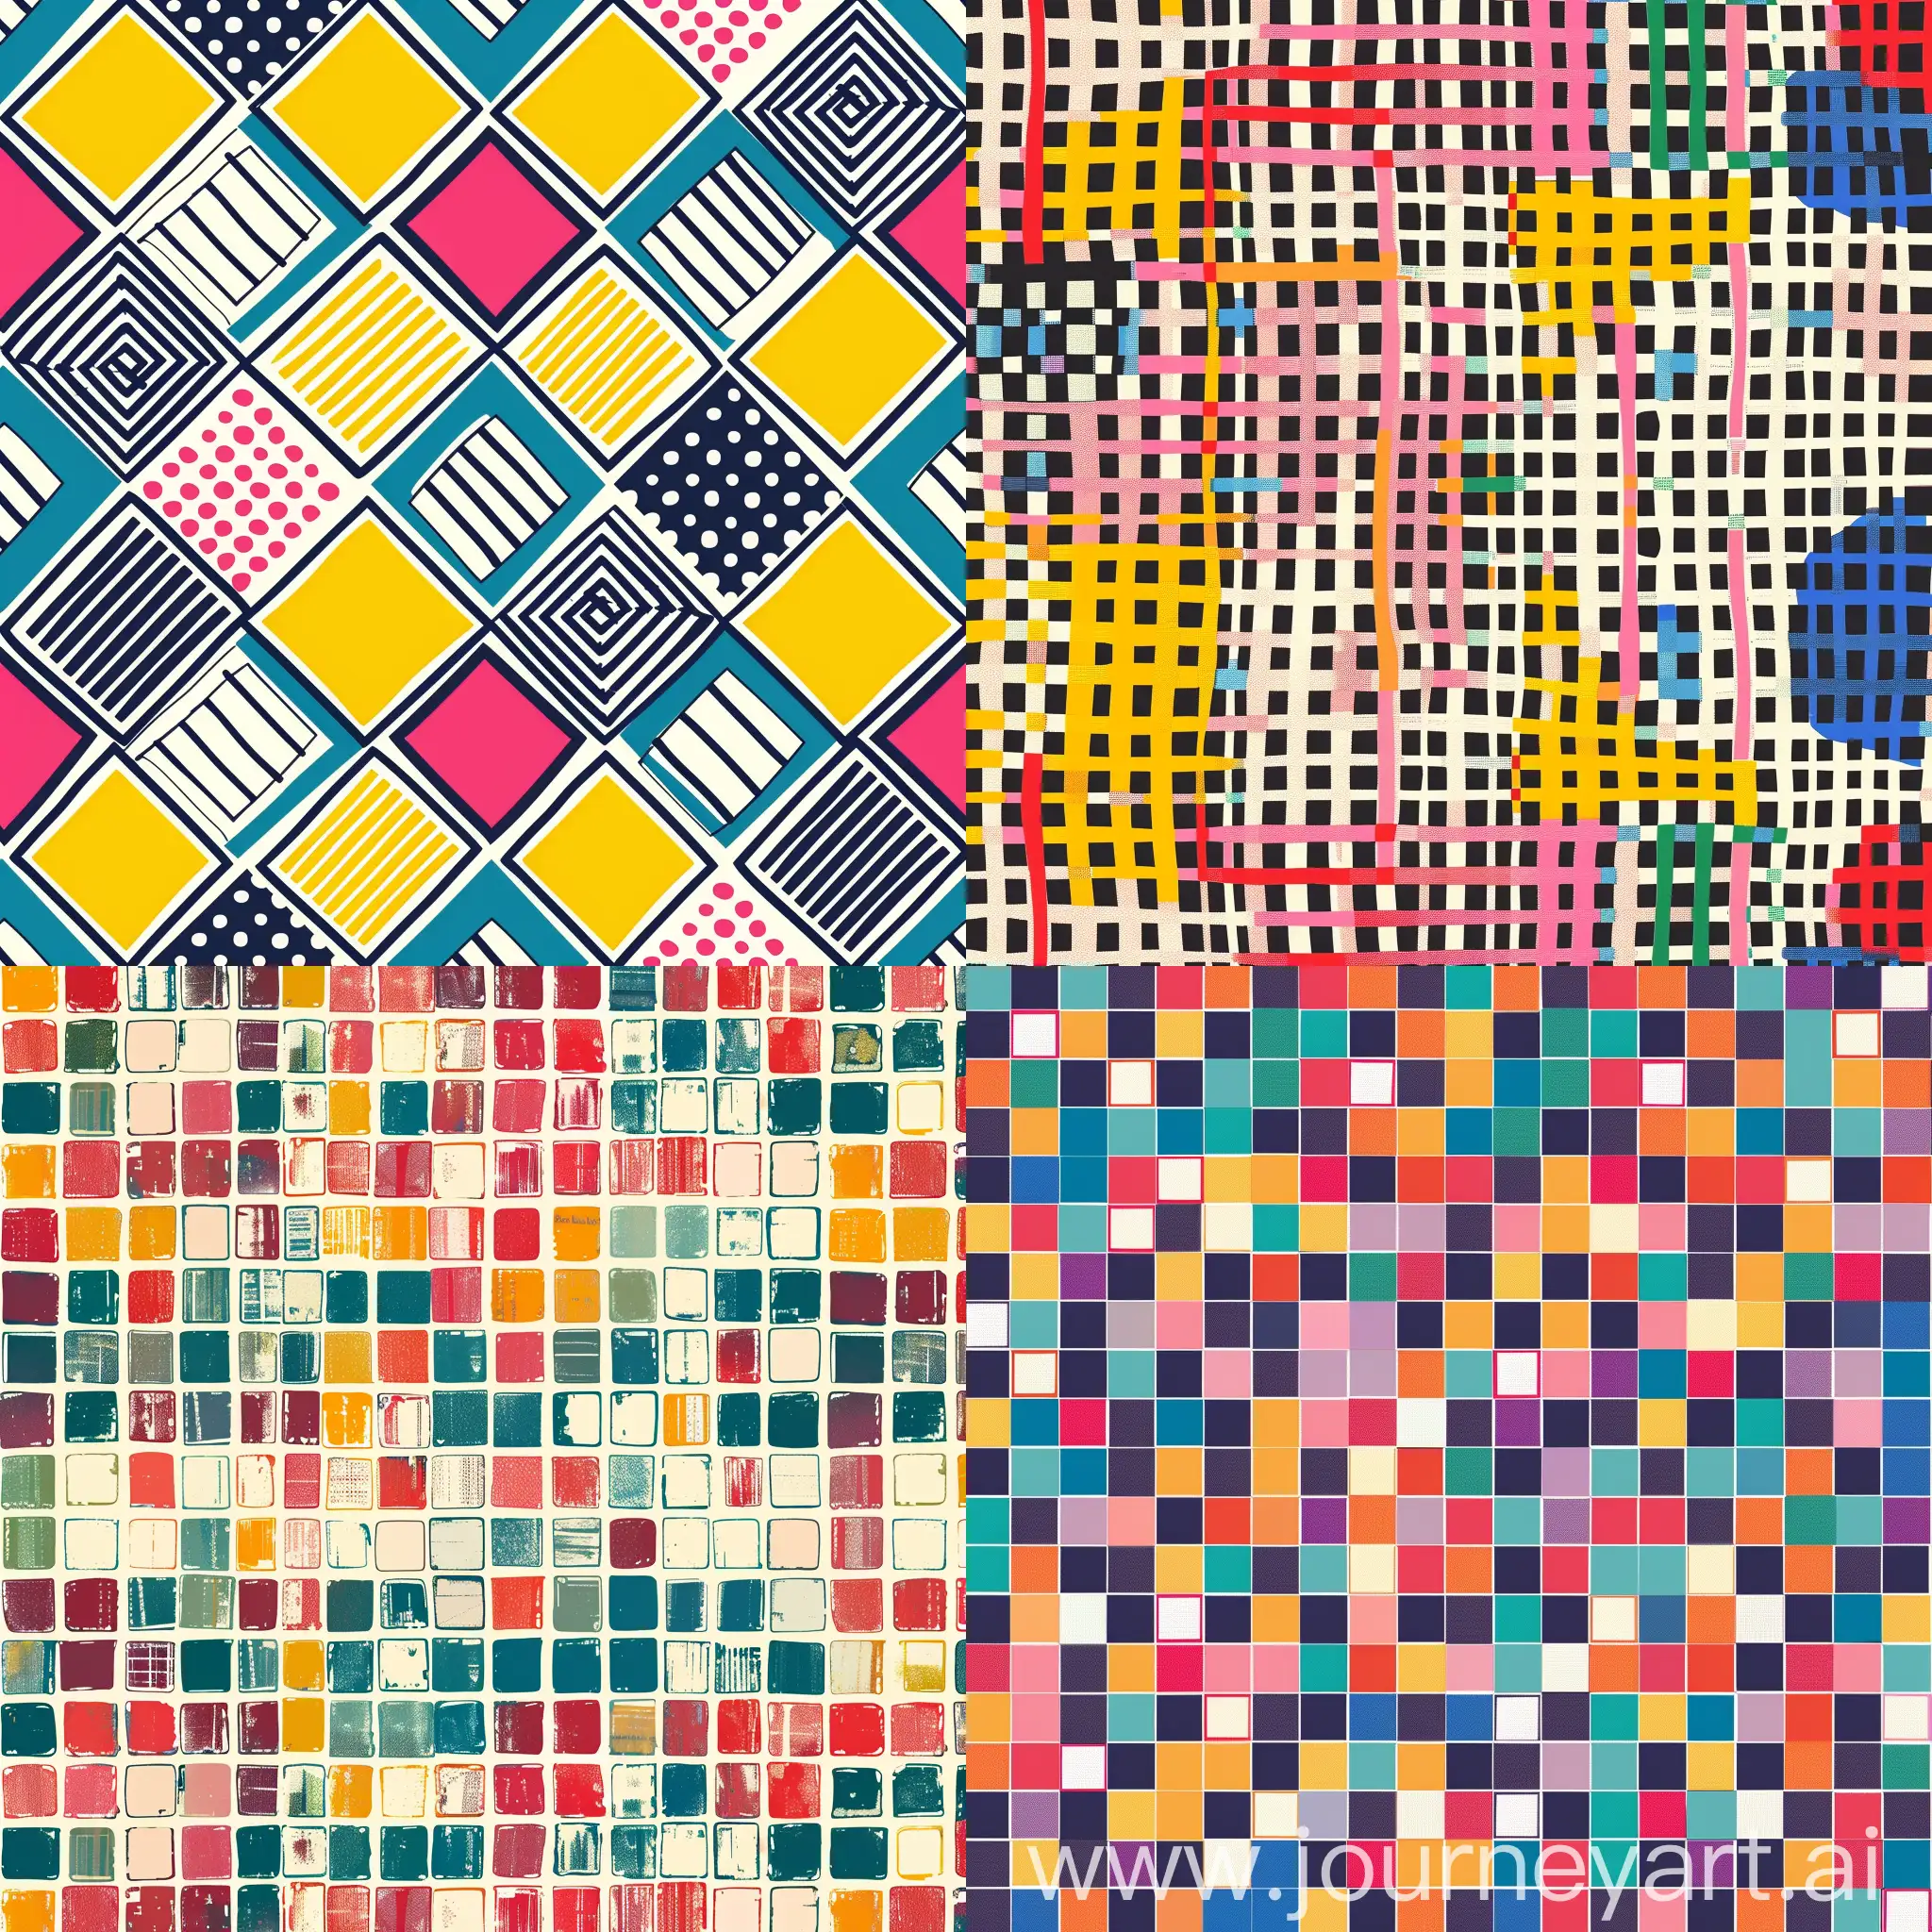 Pattern based on grid and ryb color